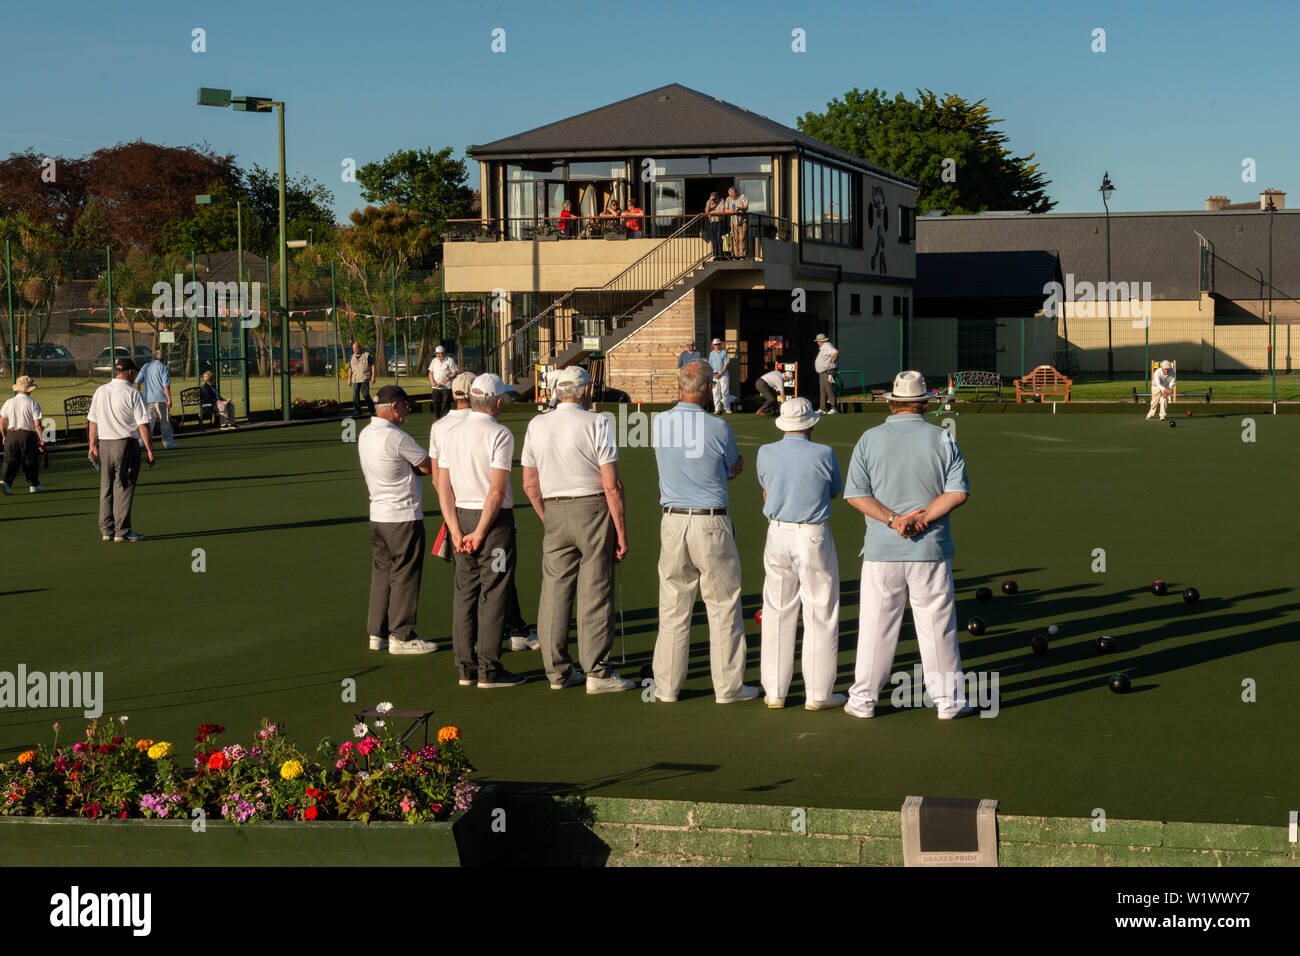 Seniors men playing lawn bowls at The Causeway Bowls Club in Dungarvan, County Waterford, Ireland Stock Photo